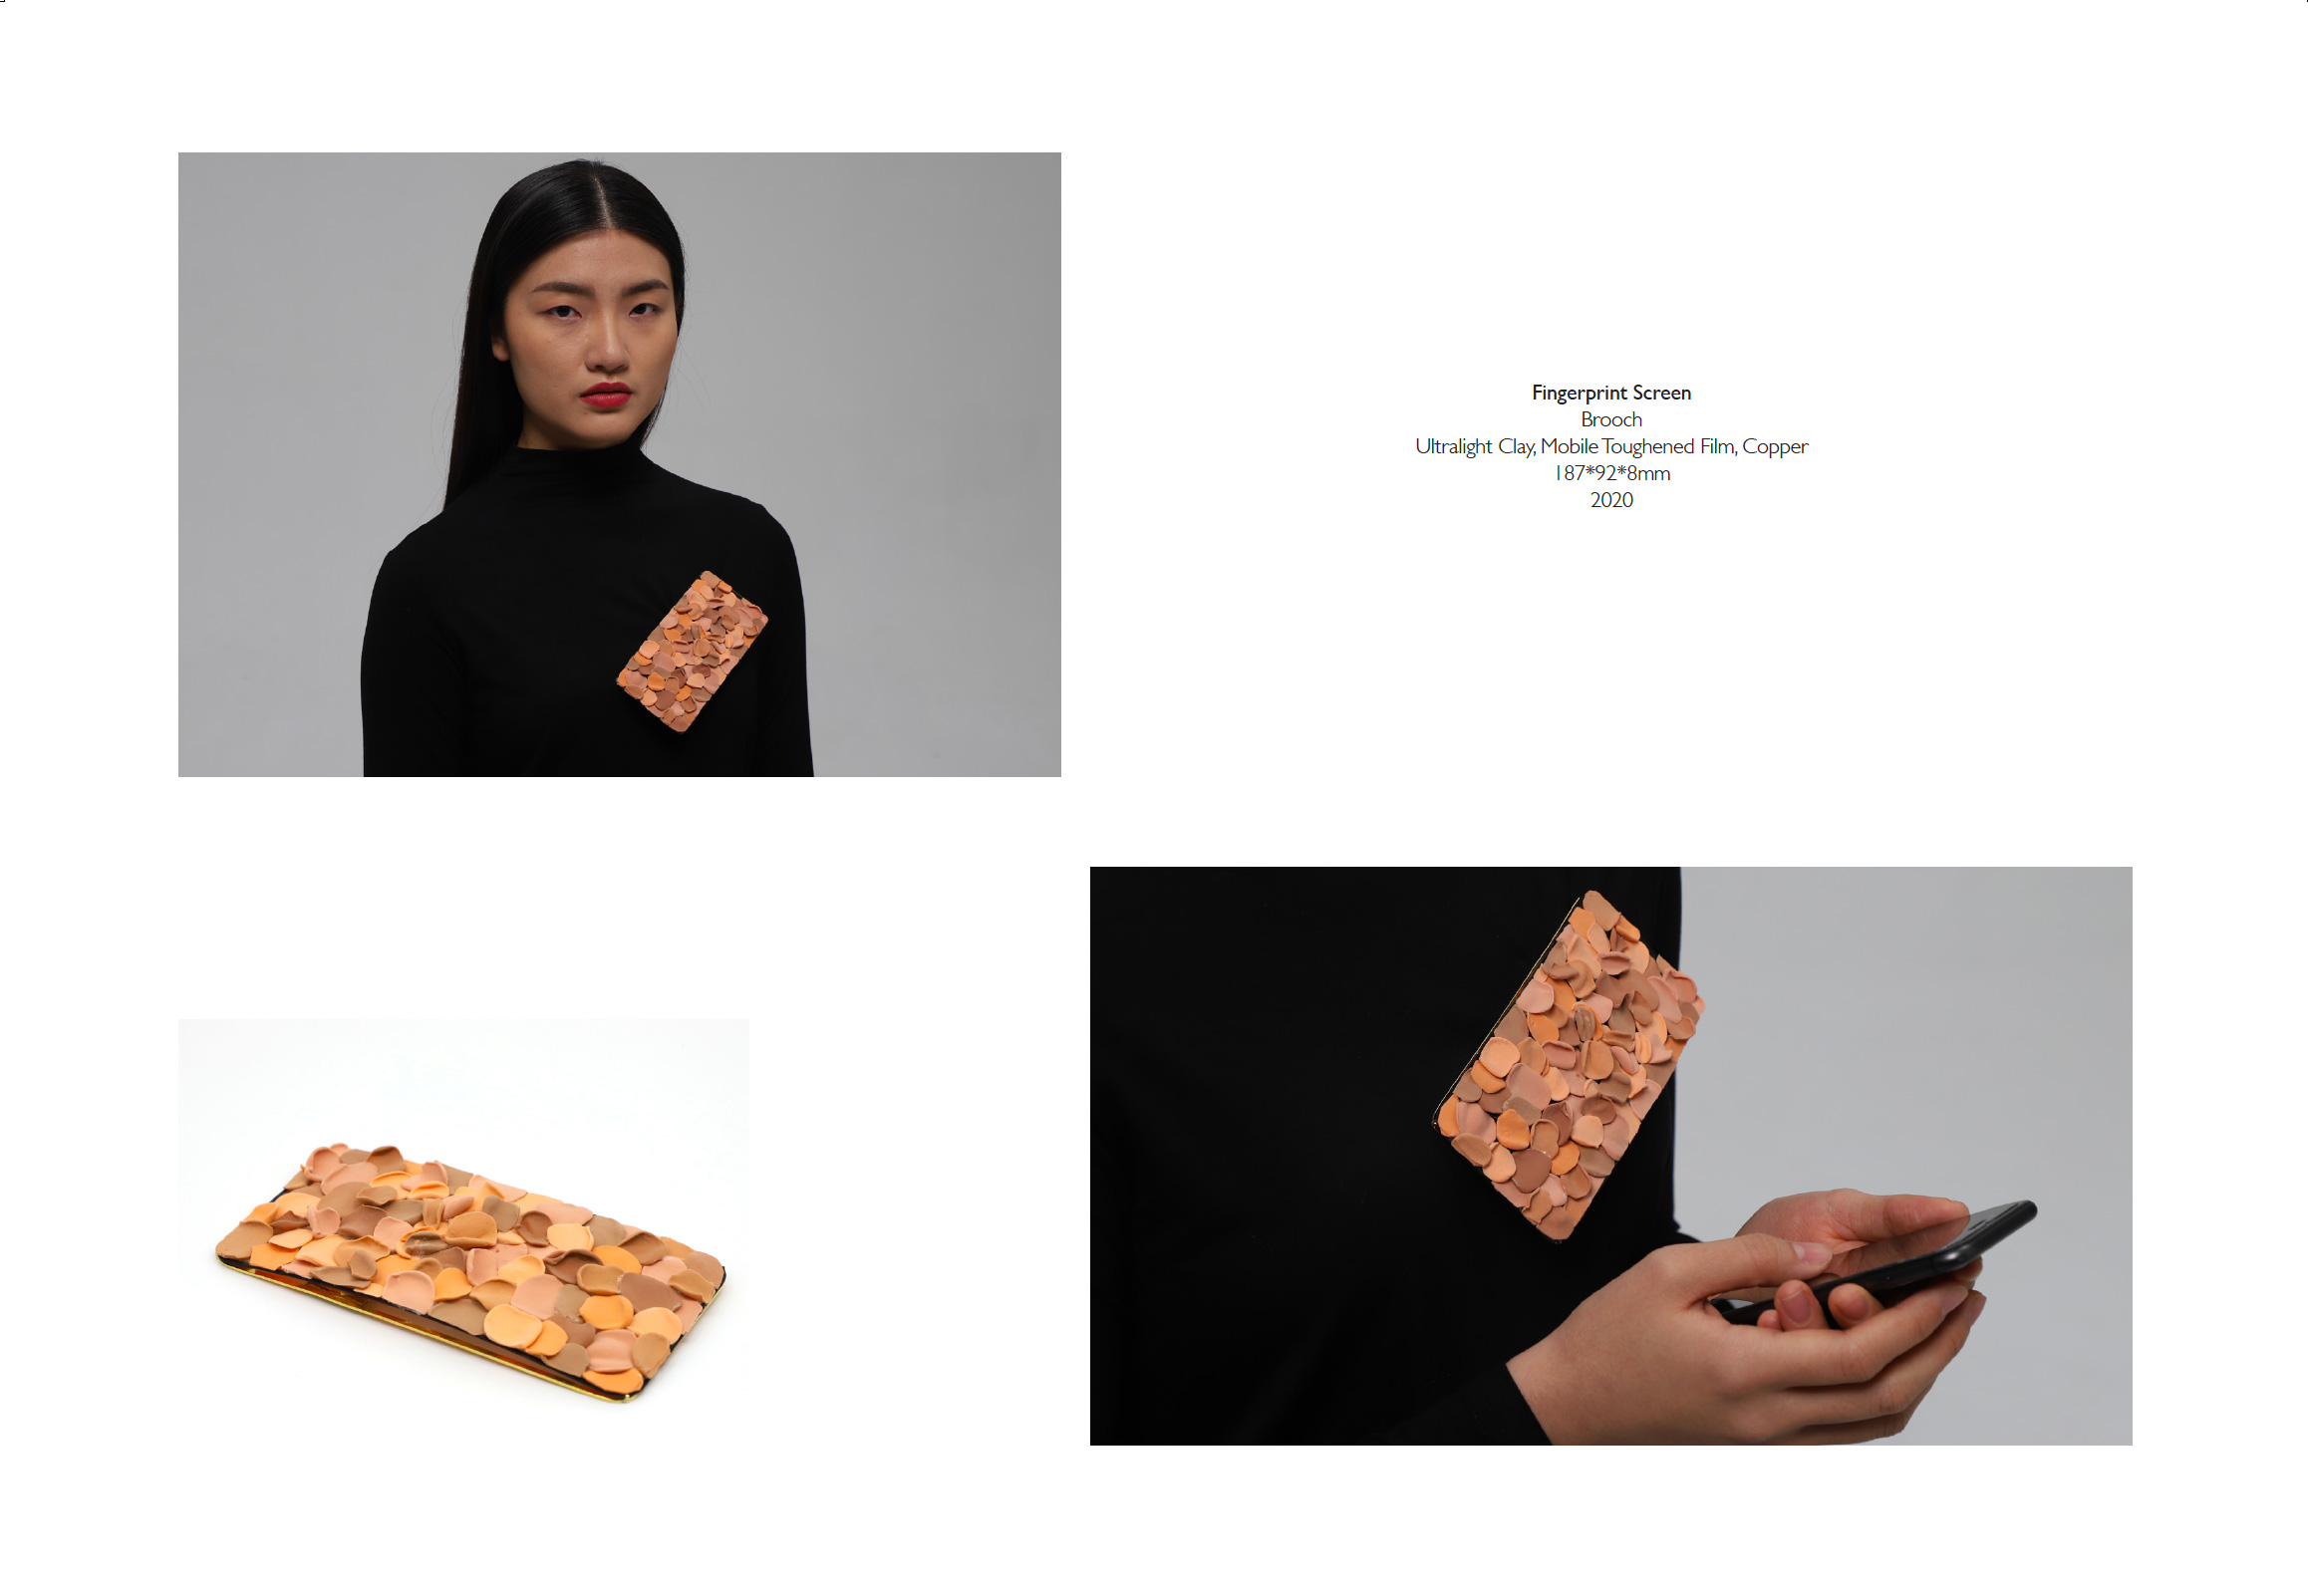 The image shows two photographs and an image of a broach. The photographs show a young Chinese woman with long black hair wearing a black jumper. She has a broach that is shaped like a mobile phone and is made of soft fabric circles in orange and copper colours. IN the second photo a close up shows some hands holding a mobile phone with the broach visible on the models top.